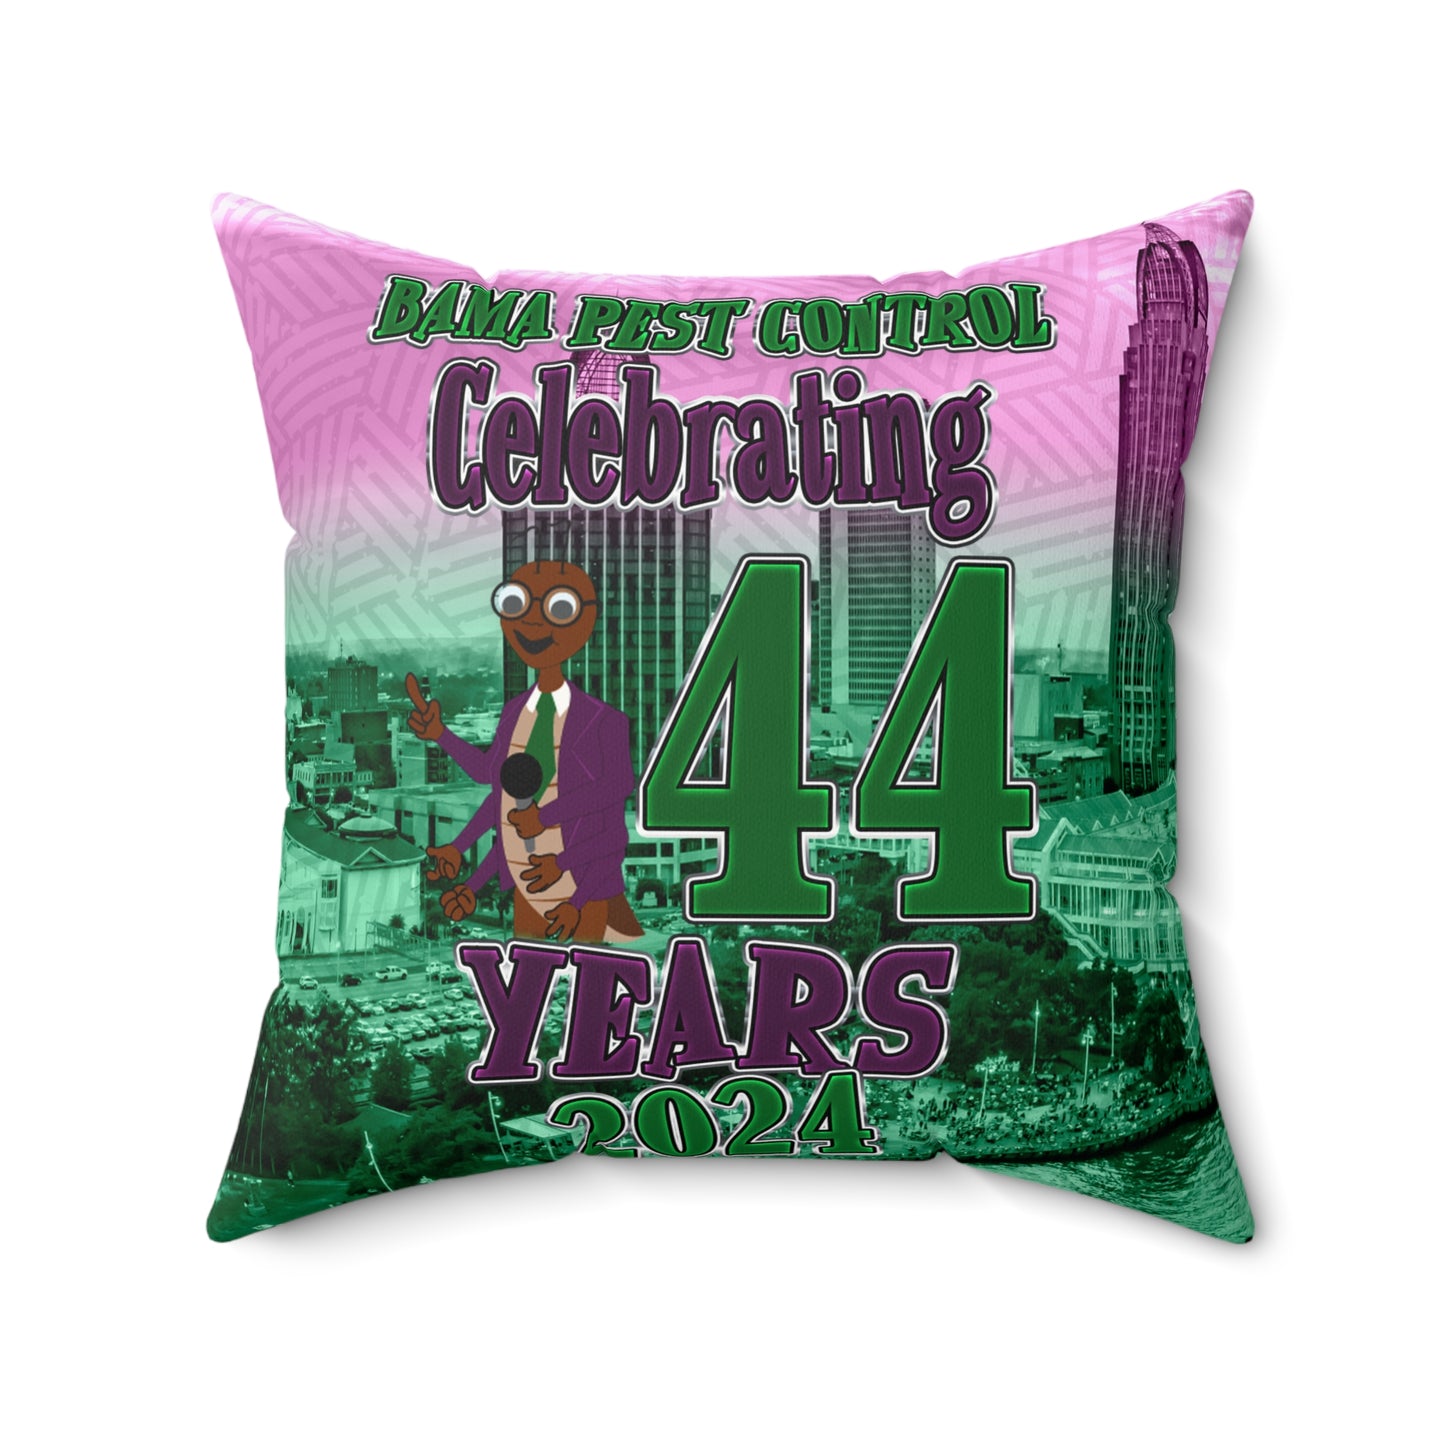 Pest Control Celebrating 44 Years in Business Polyester Square Pillow